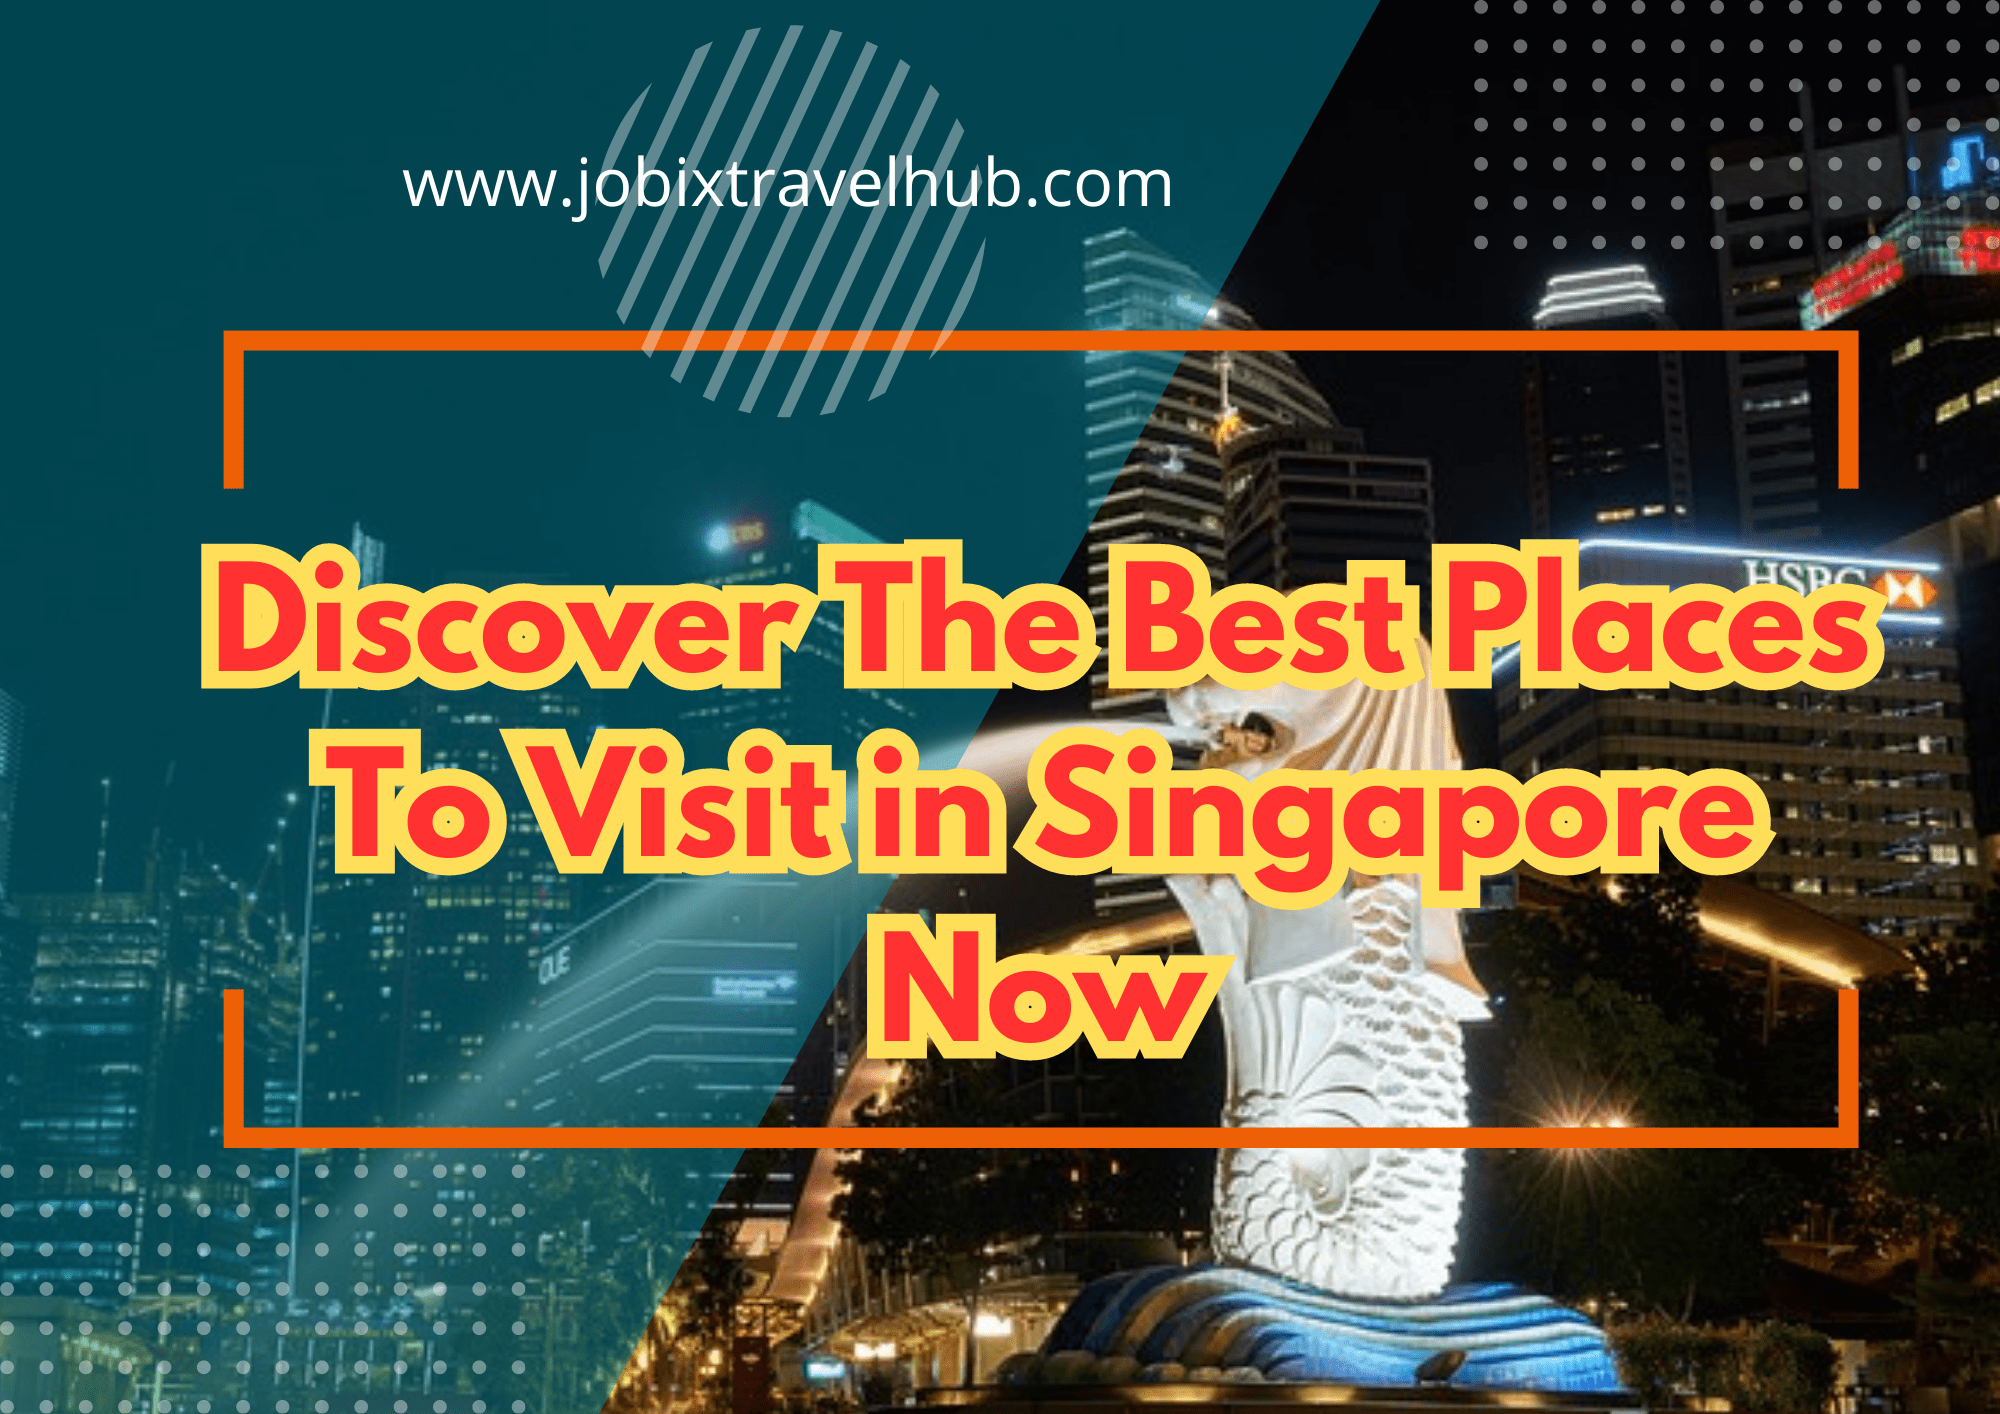 Welcome to Singapore! Join us on this complete exploration journey and get ready to discover some incredible places to visit in Singapore!